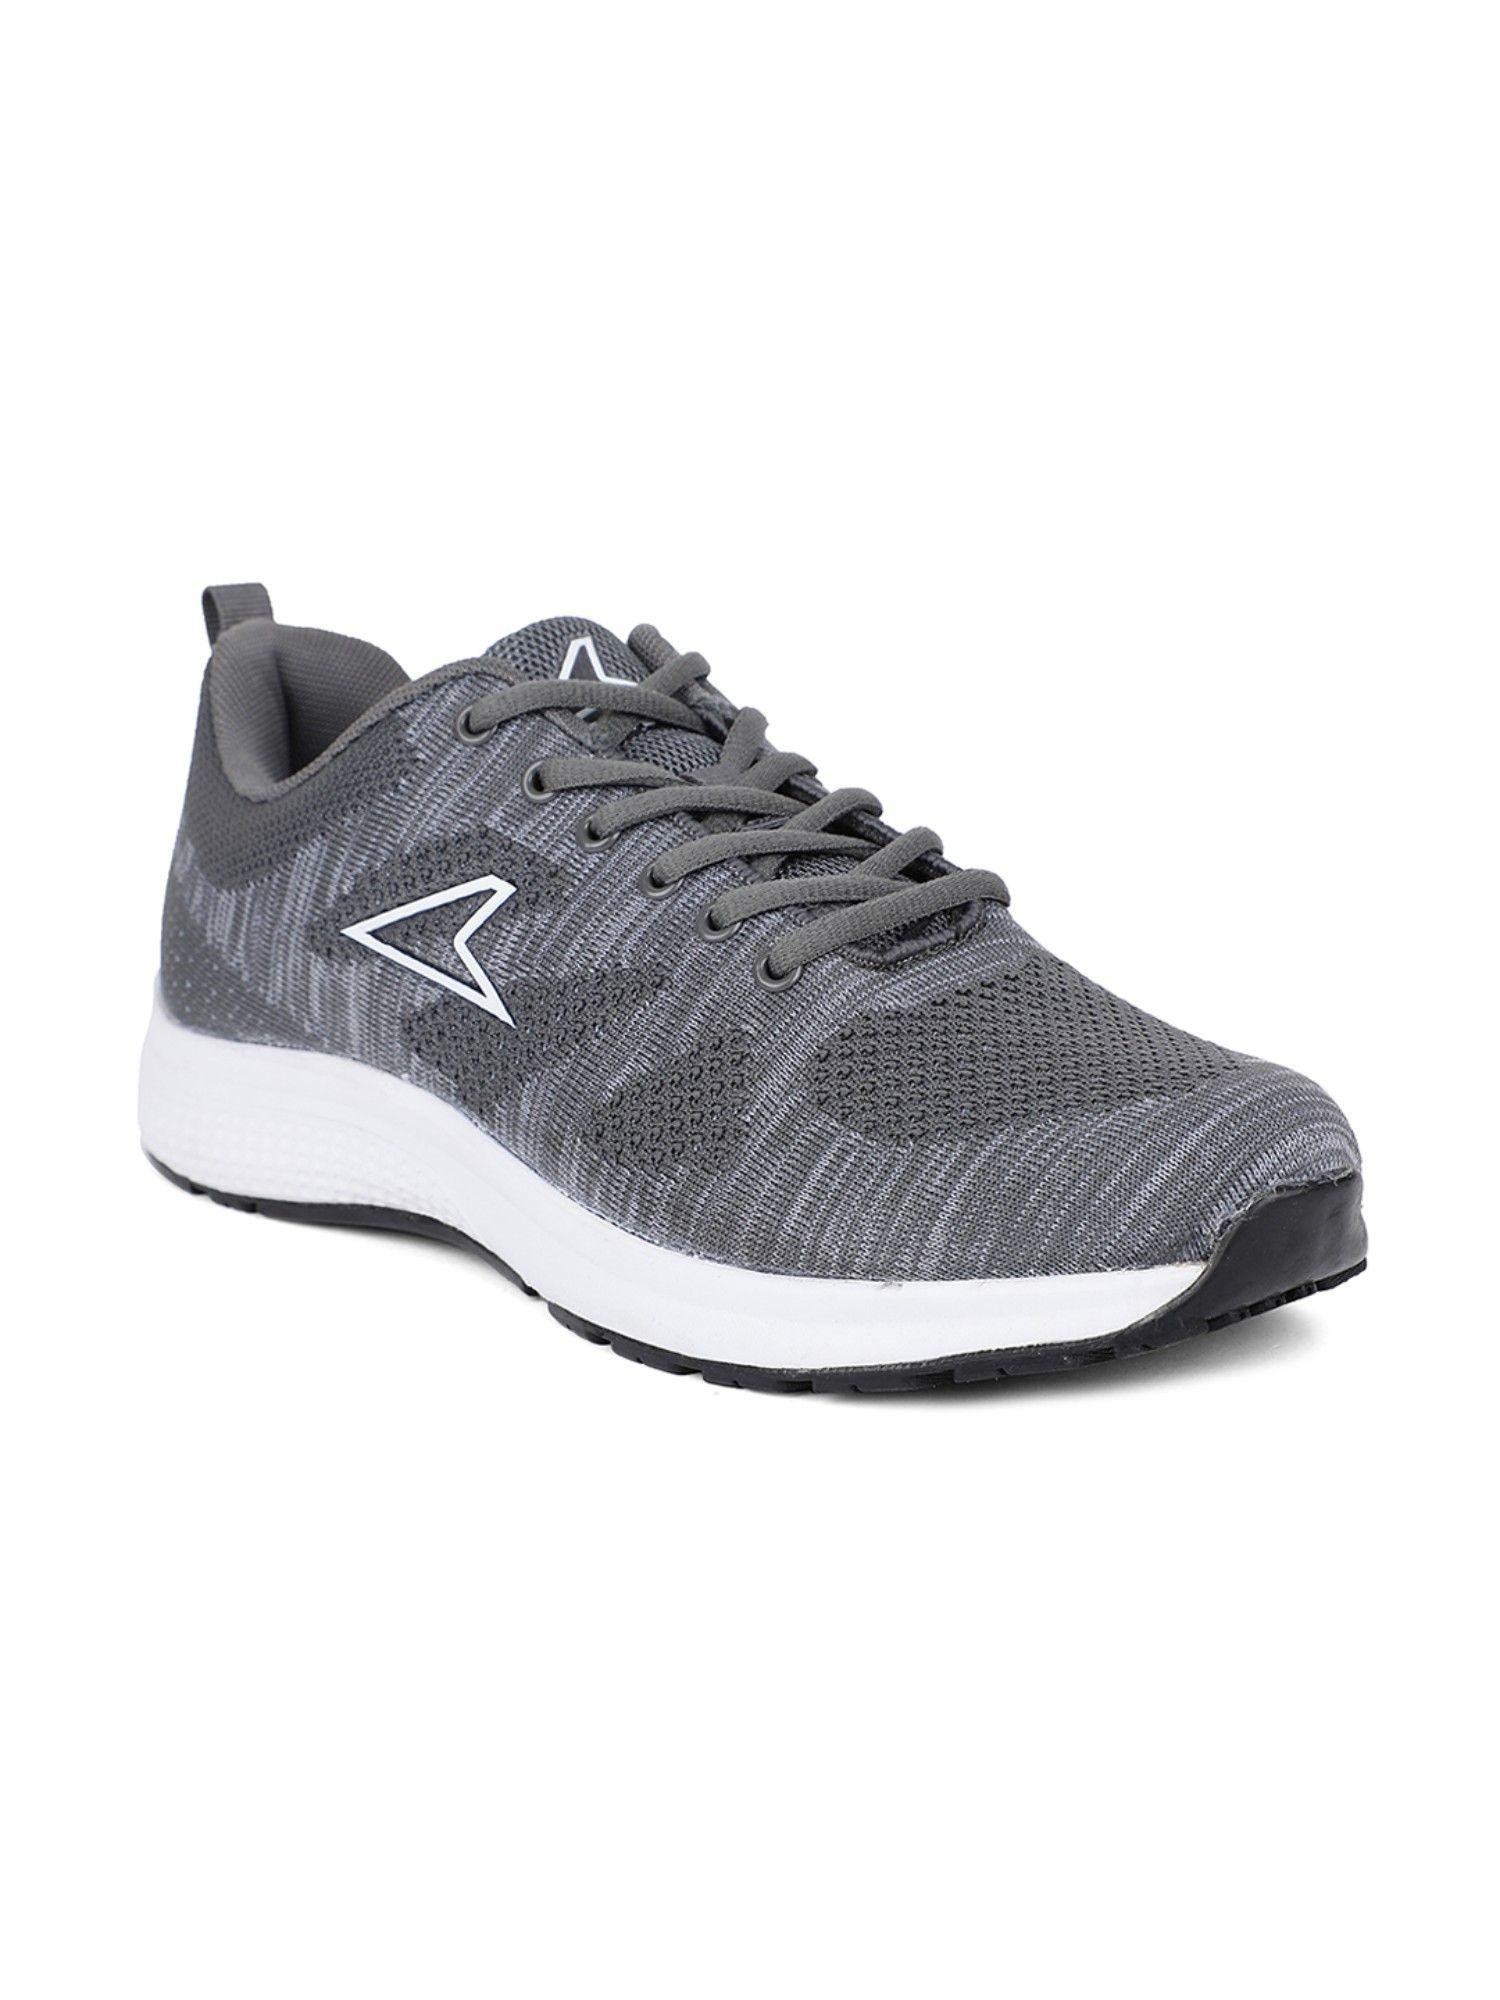 Woven Grey Running Shoes